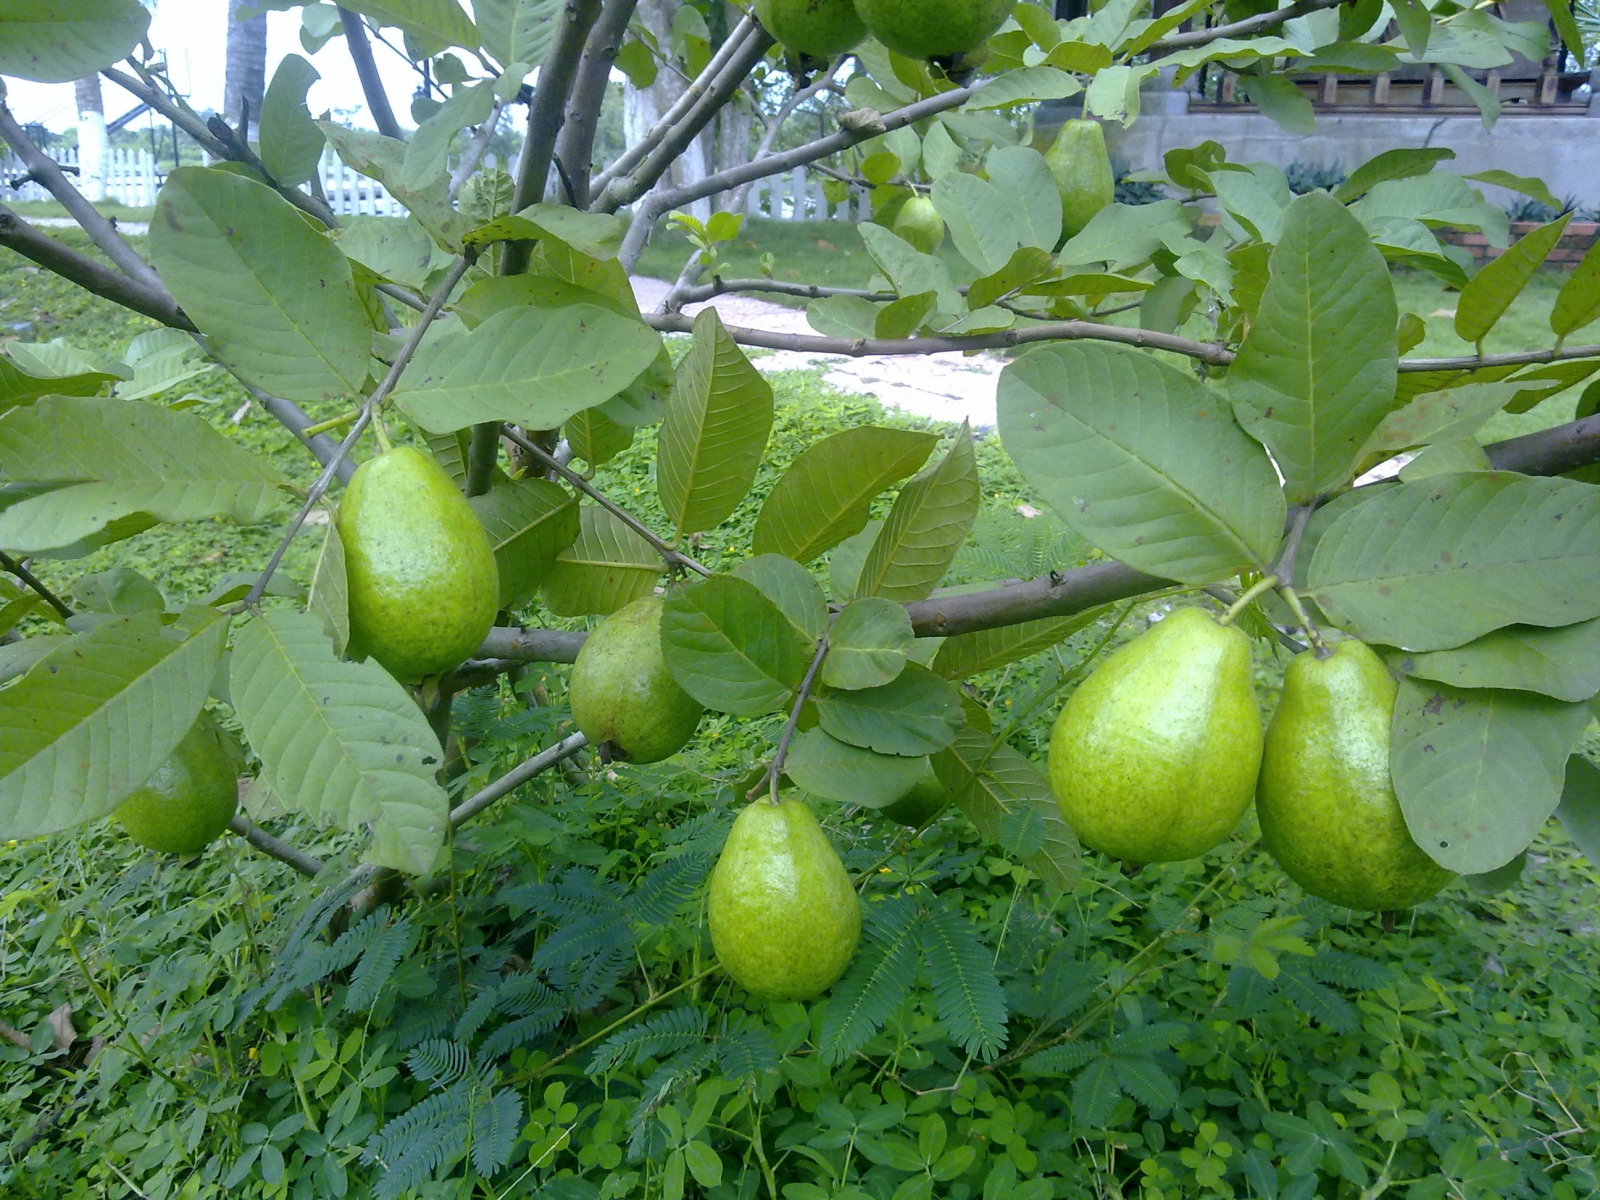 Visiting the Western guava garden